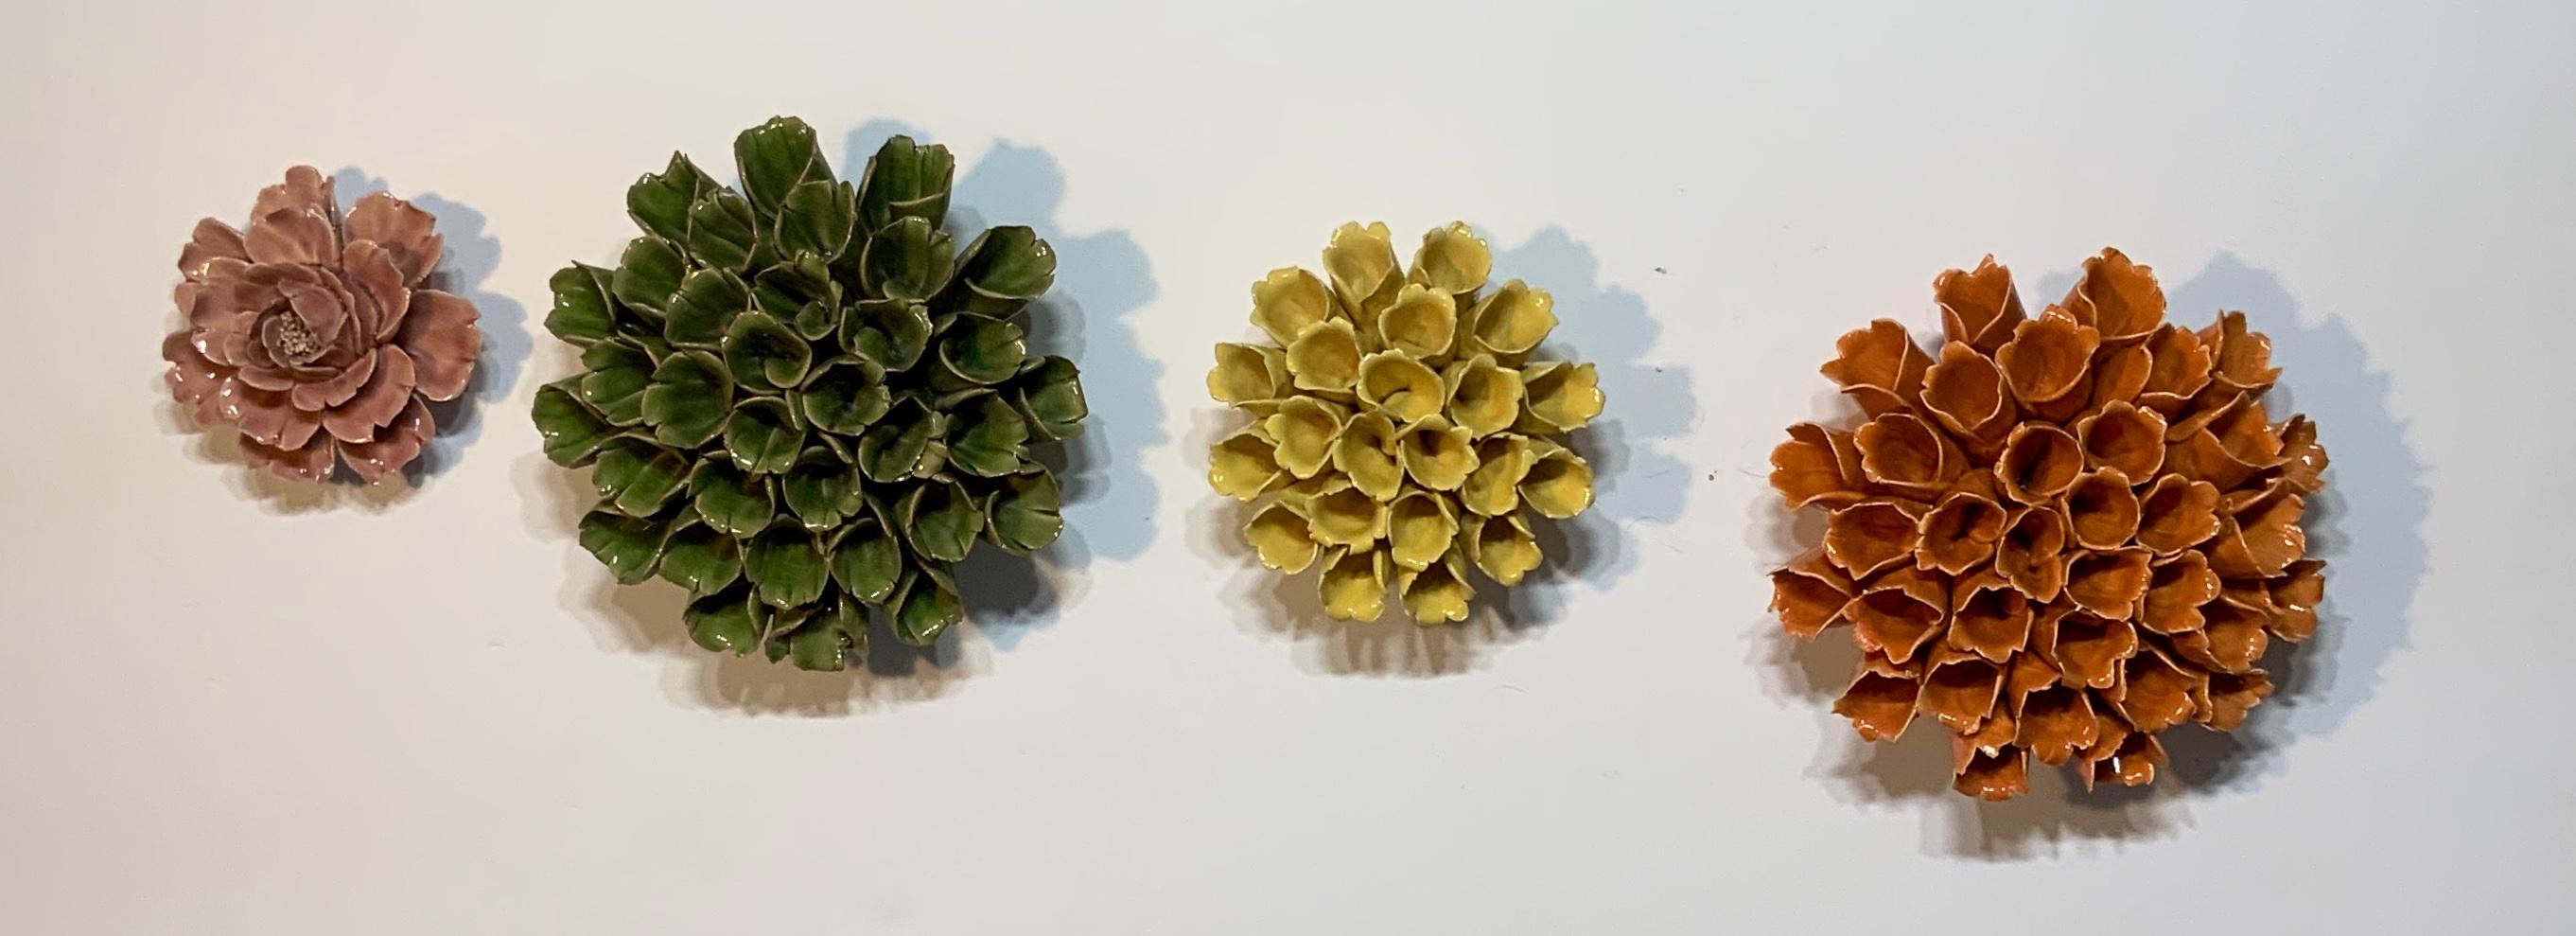 Four Artistically Made Ceramic Floral Wall Hanging 5